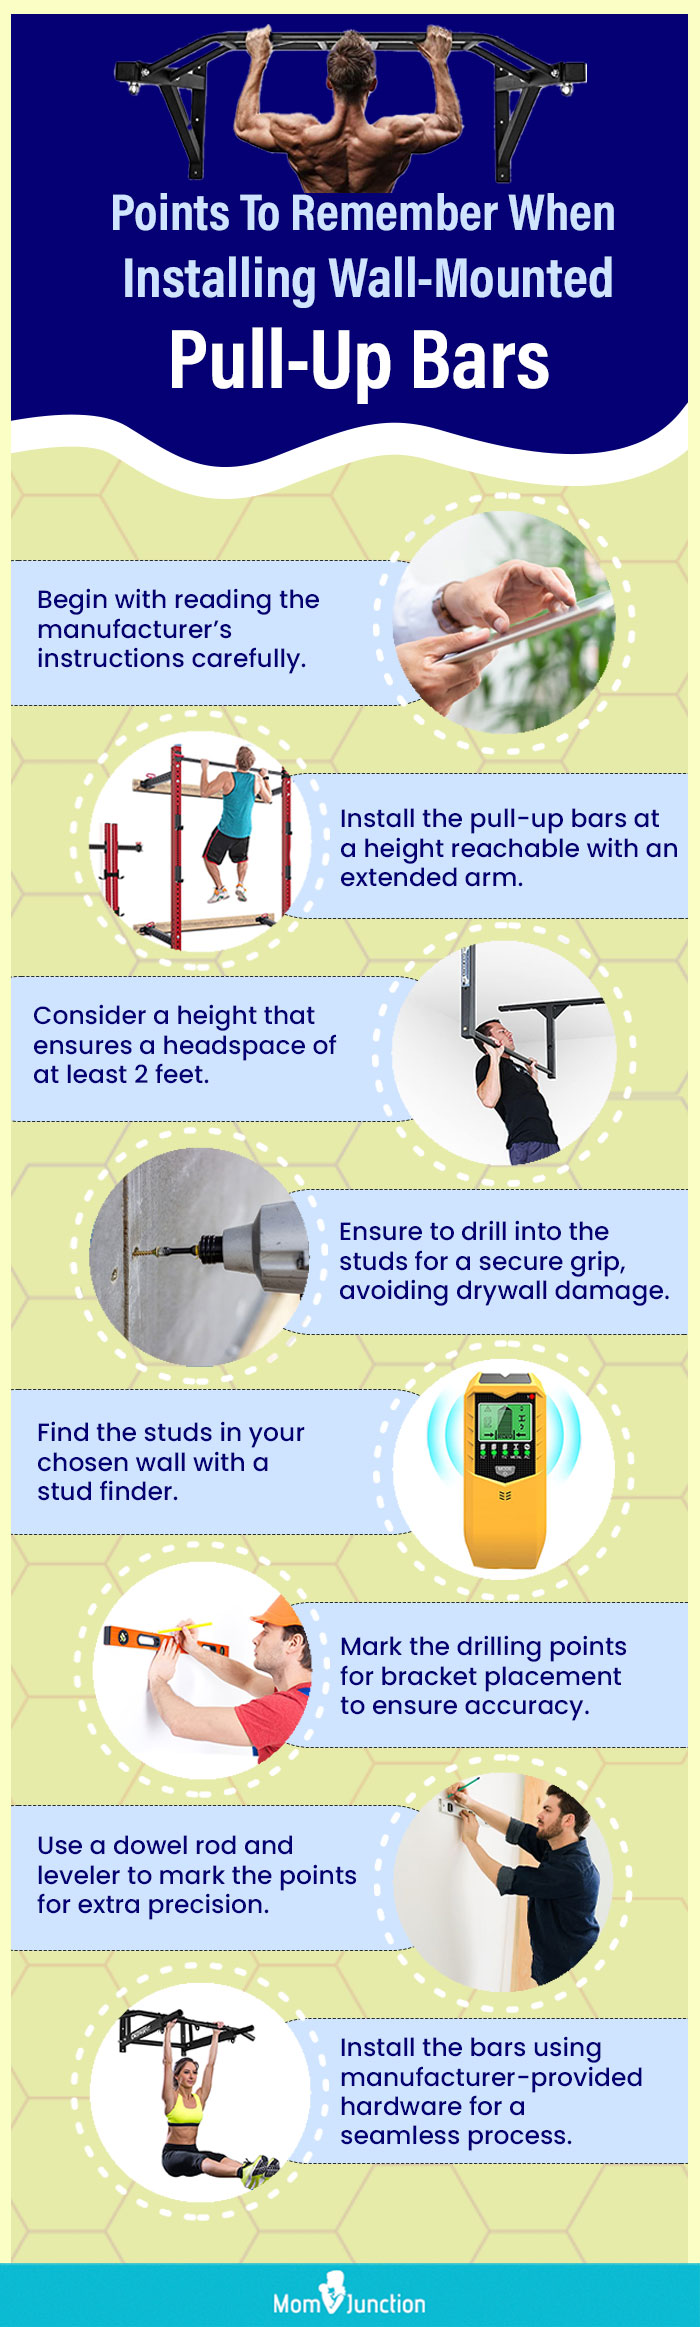 Points To Remember When Installing Wall Mounted Pull Up Bars (infographic)